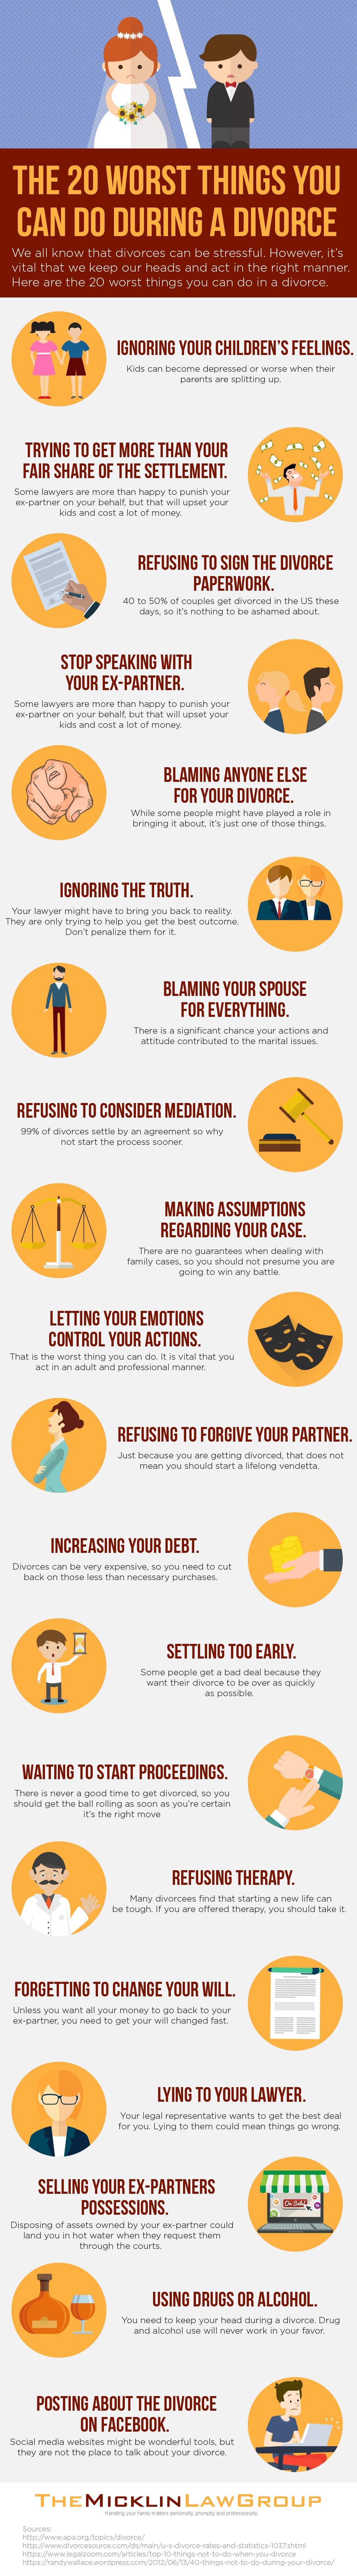 infographic of 20 worst things you can do during a divorce